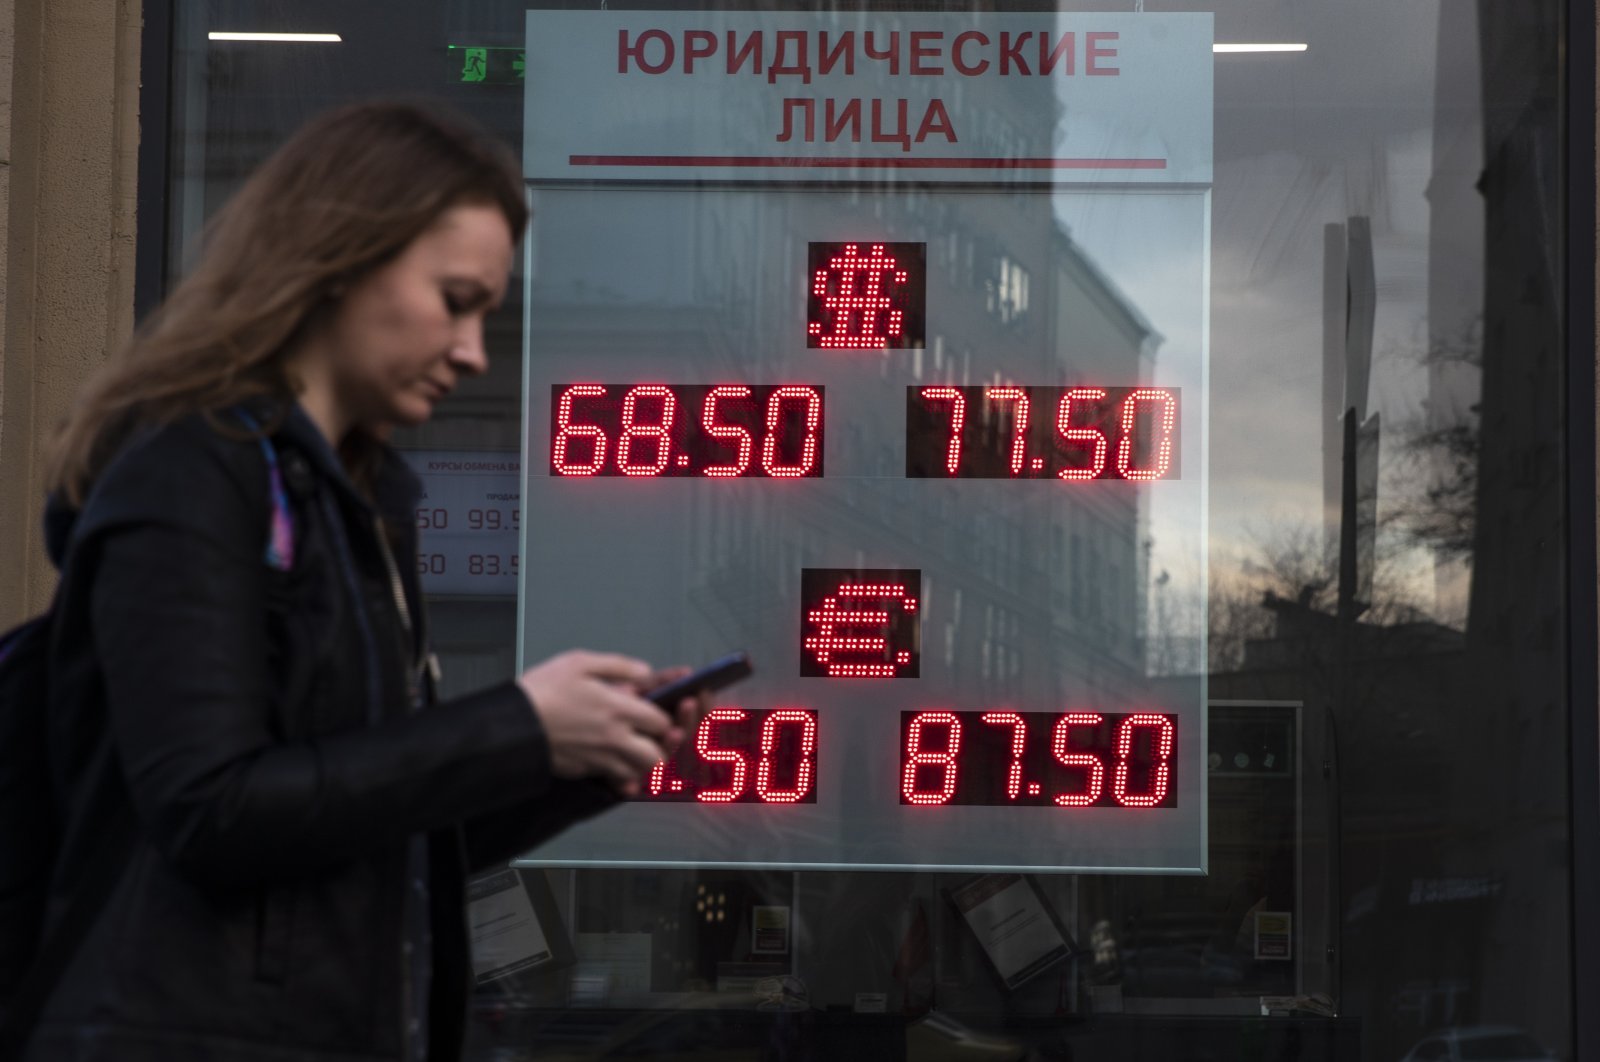 A woman walks past an currency exchange office screen displaying the exchange rates of U.S. Dollar and Euro to Russian Rubles, in Moscow, Russia, Monday, March 9, 2020. (AP Photo)